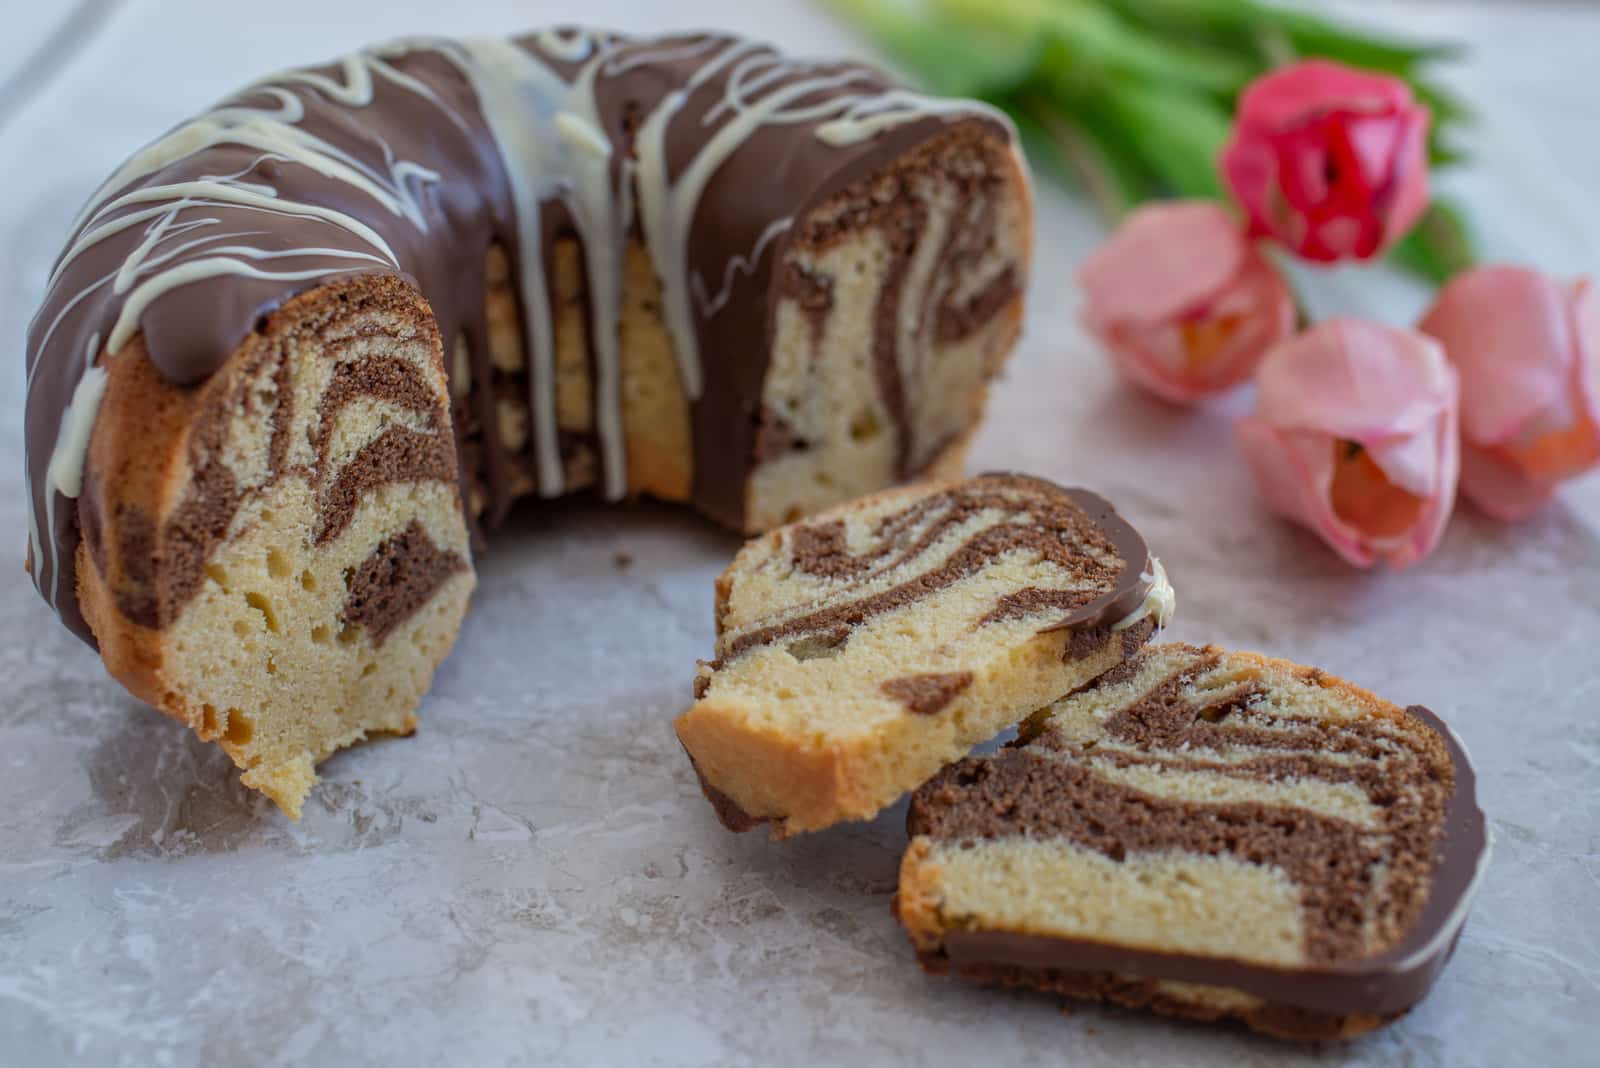 A zebra cake with alternating dark chocolate and vanilla swirl layers, topped with milk and white chocolate drizzle, displayed alongside pink tulips on a marble countertop.